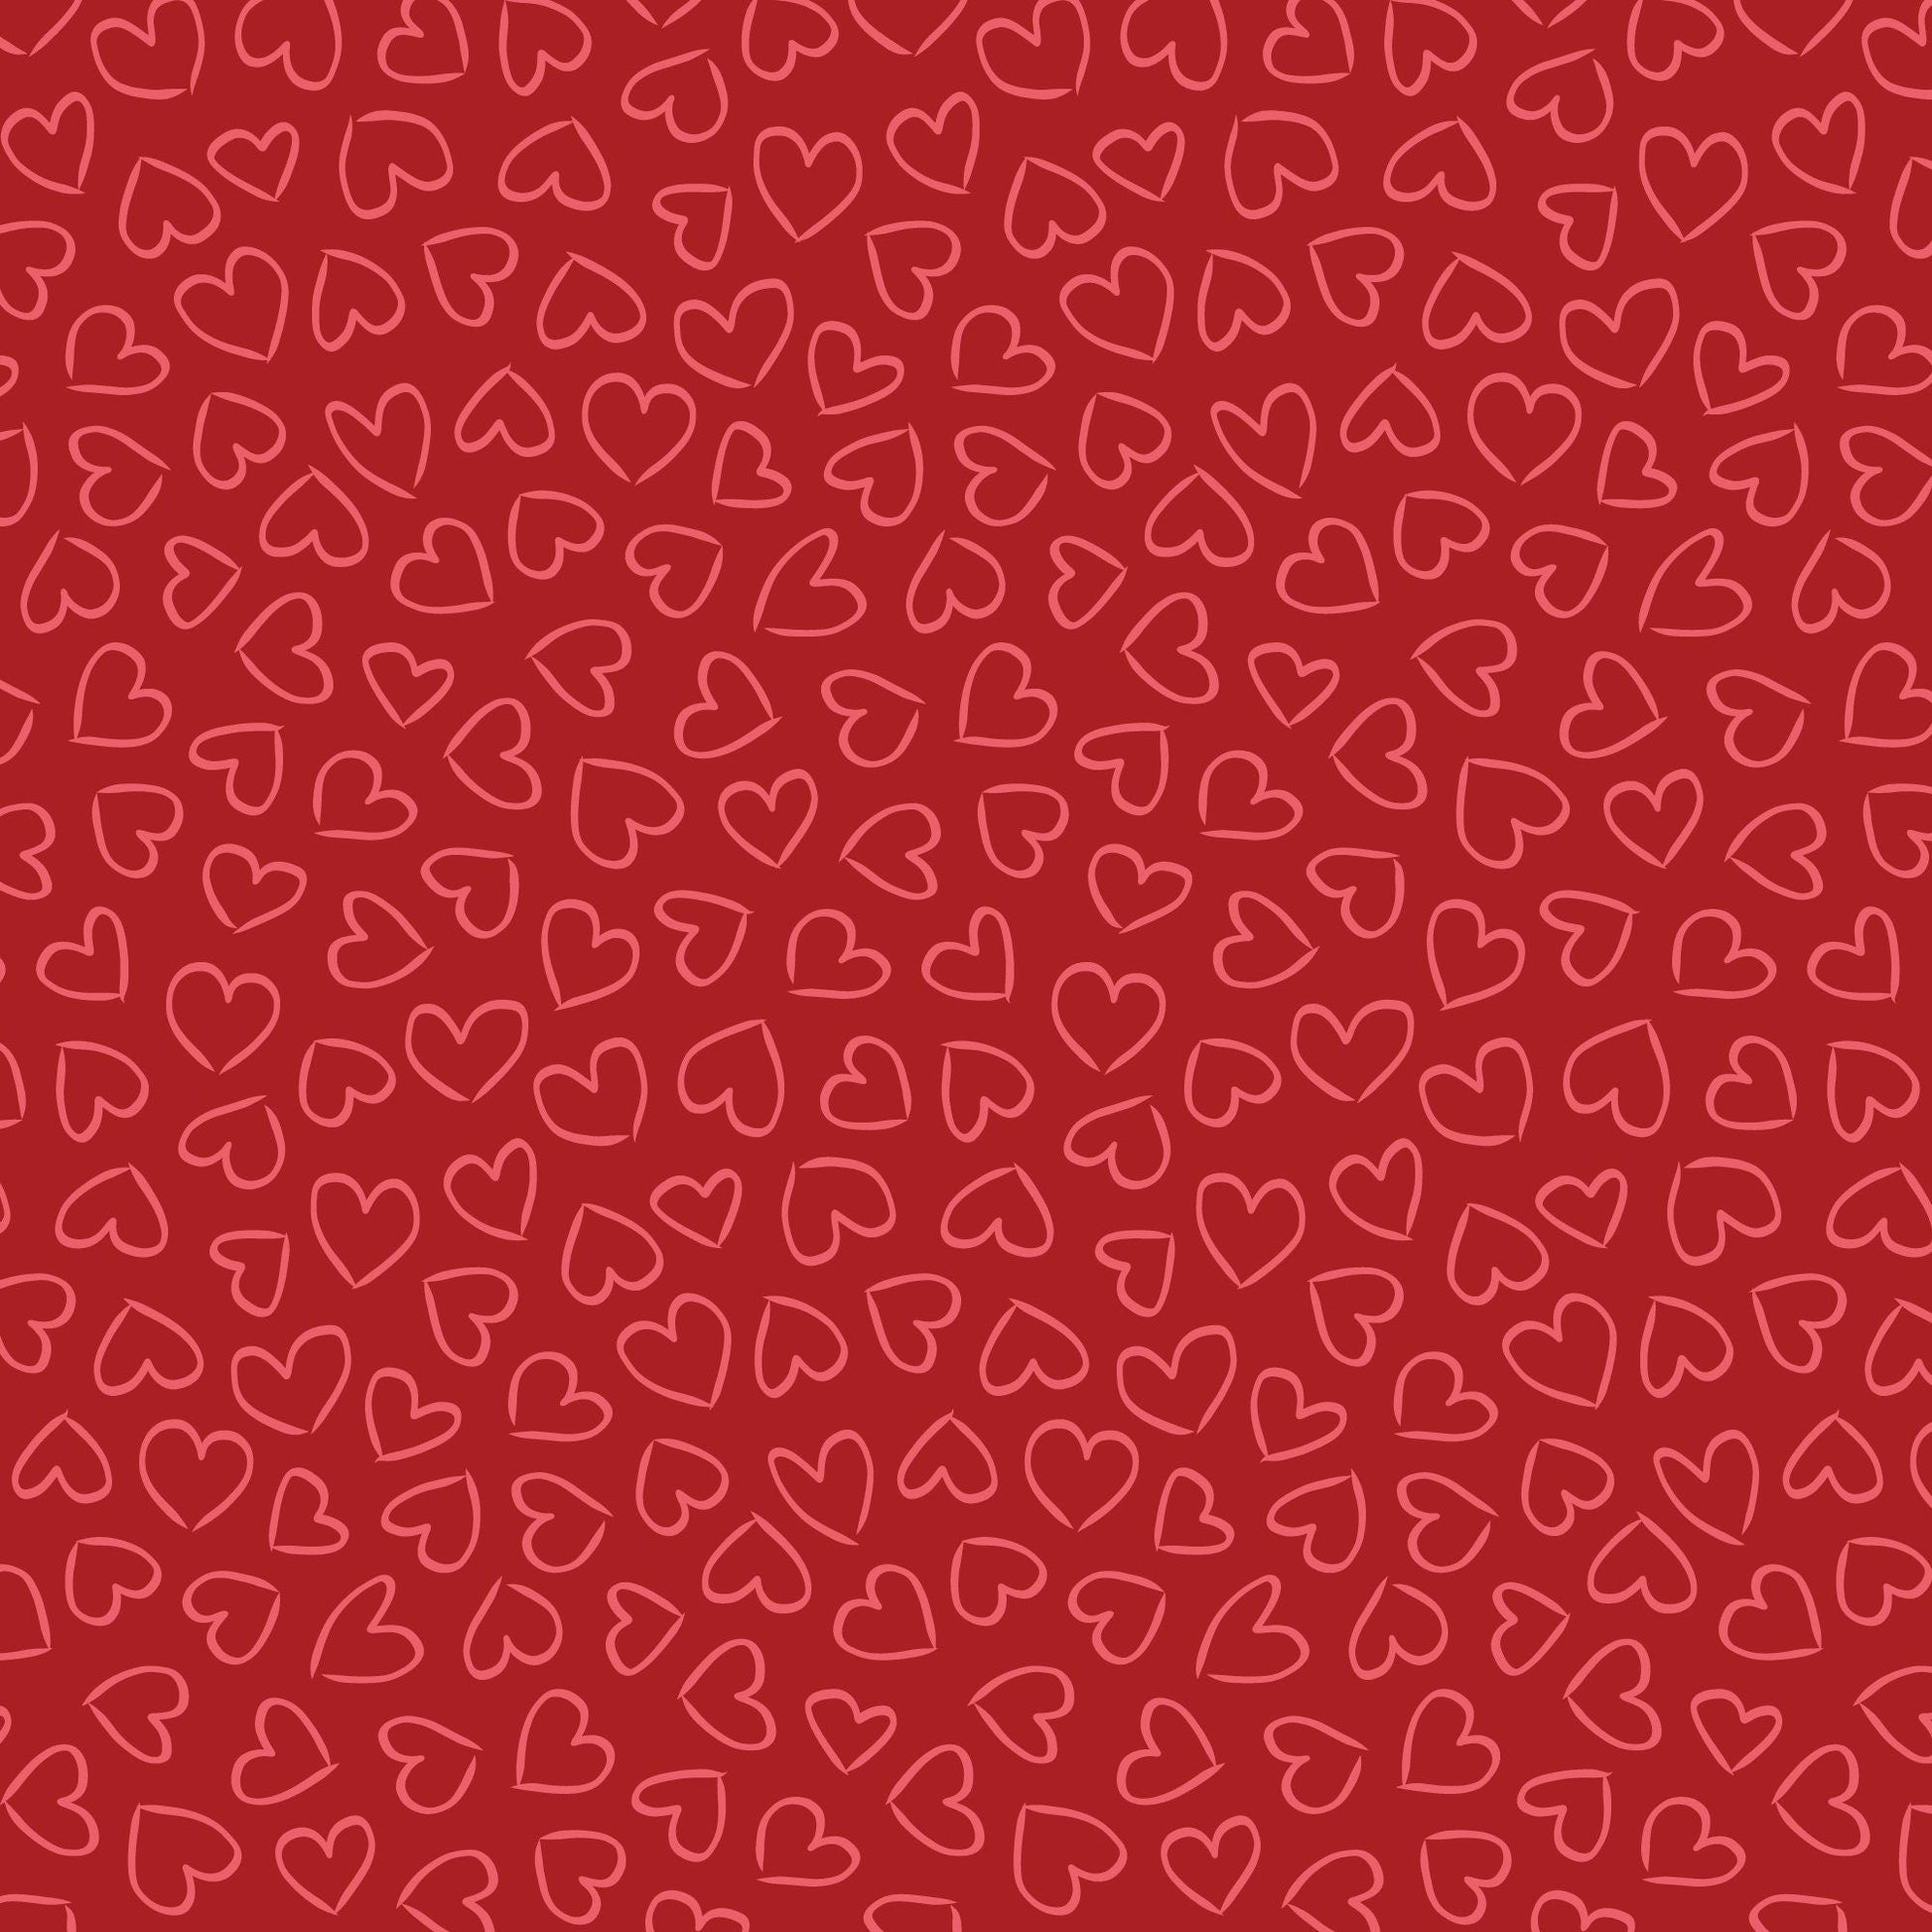 Hearts Drawing Gift Wrap